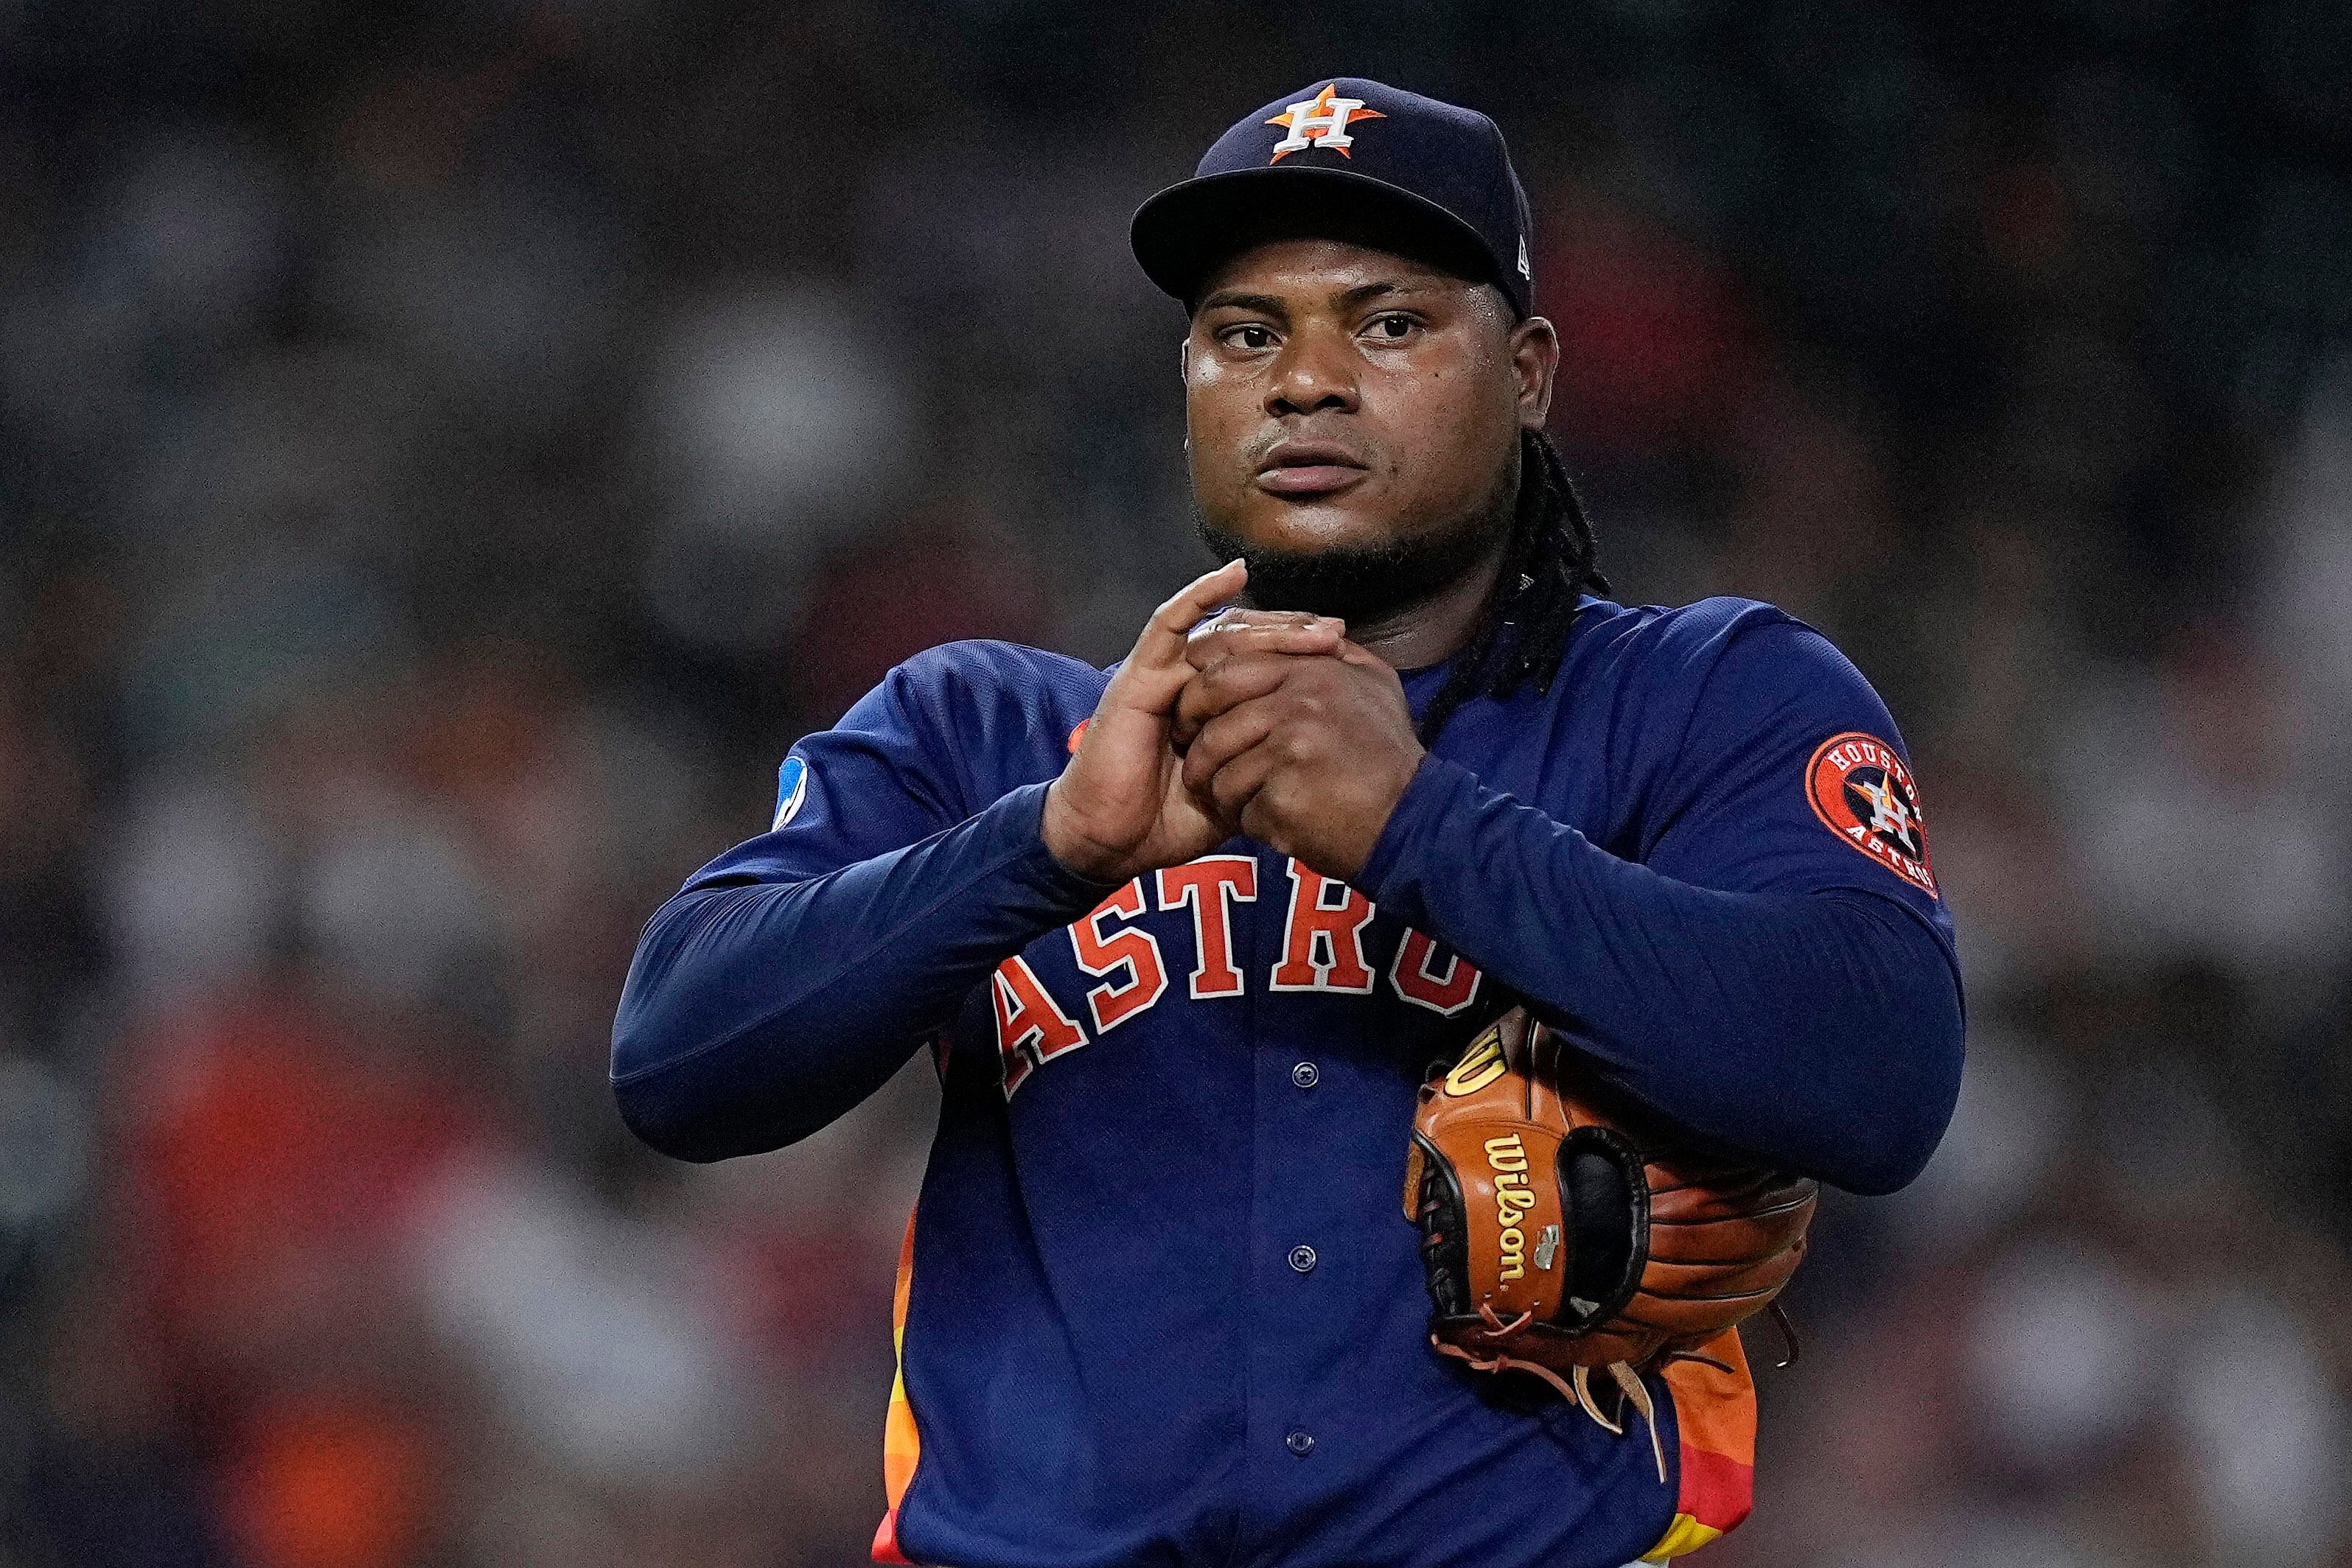 Framber Valdez no-hitter: Astros ace blanks Guardians on just 93 pitches  for third MLB no-no in 2023